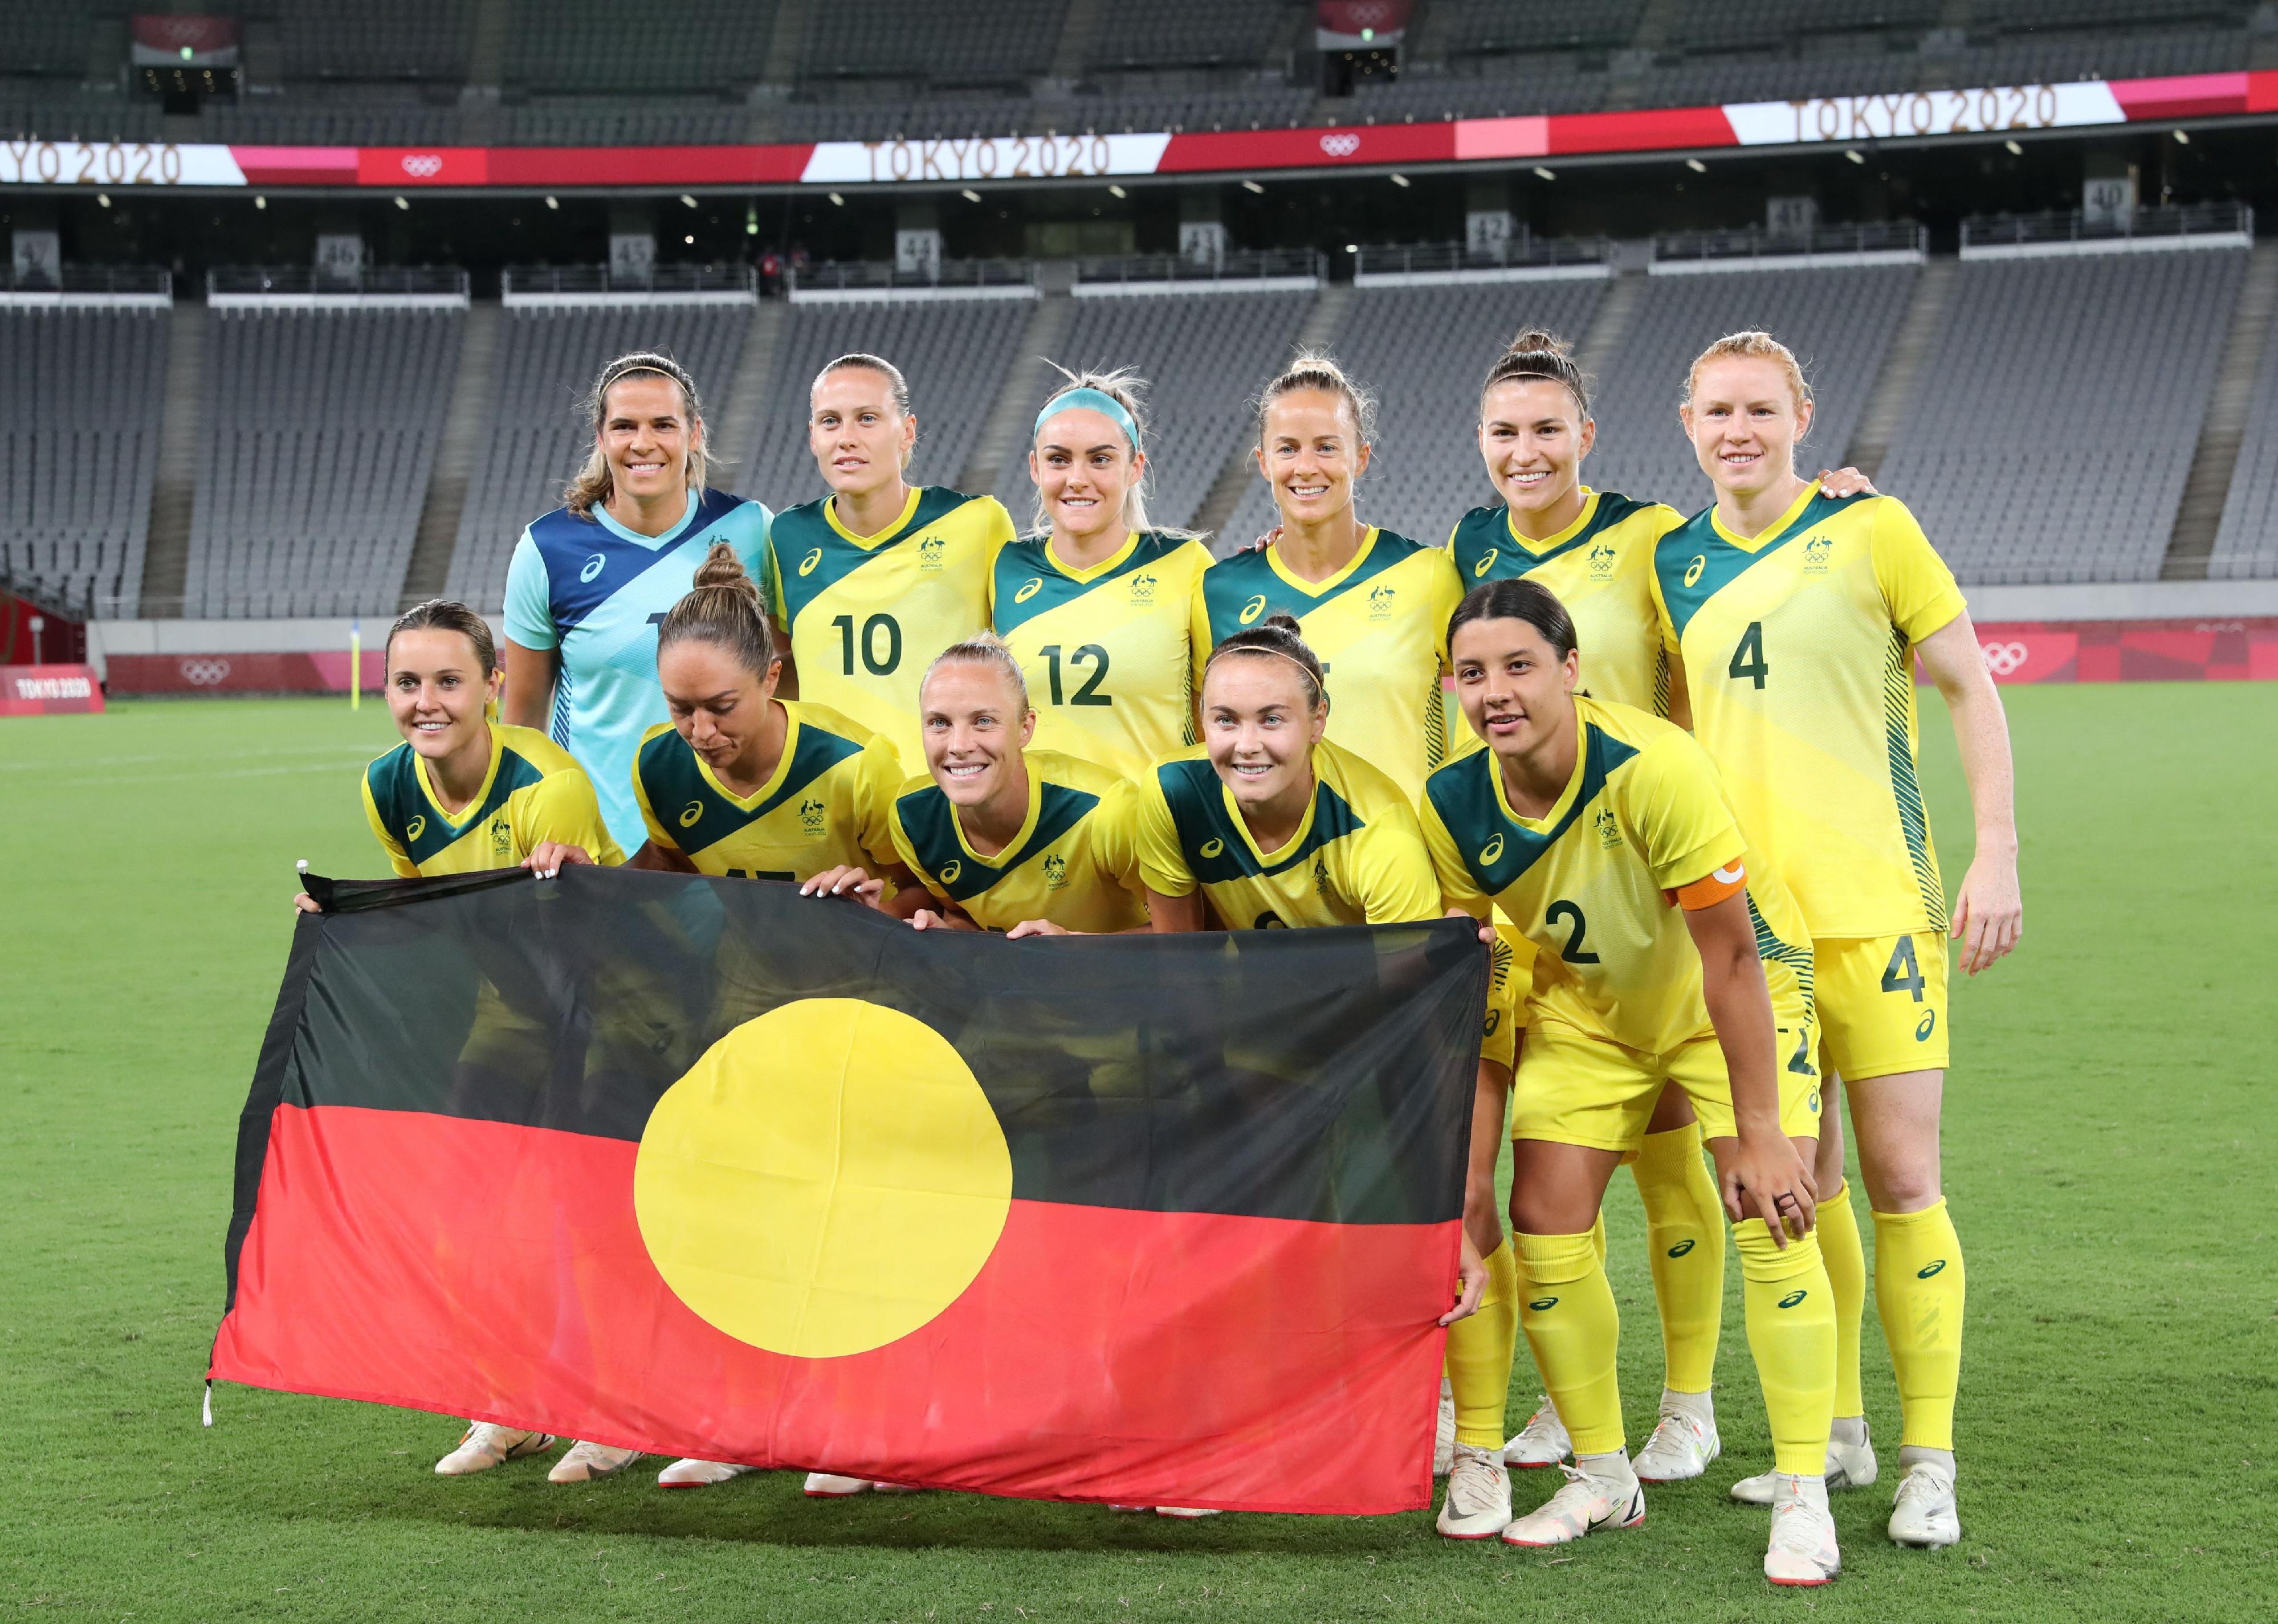 Australia poses for a team photo with the Australian Aboriginal flag prior to the Tokyo 2020 Olympic Games women's group G first round football match.